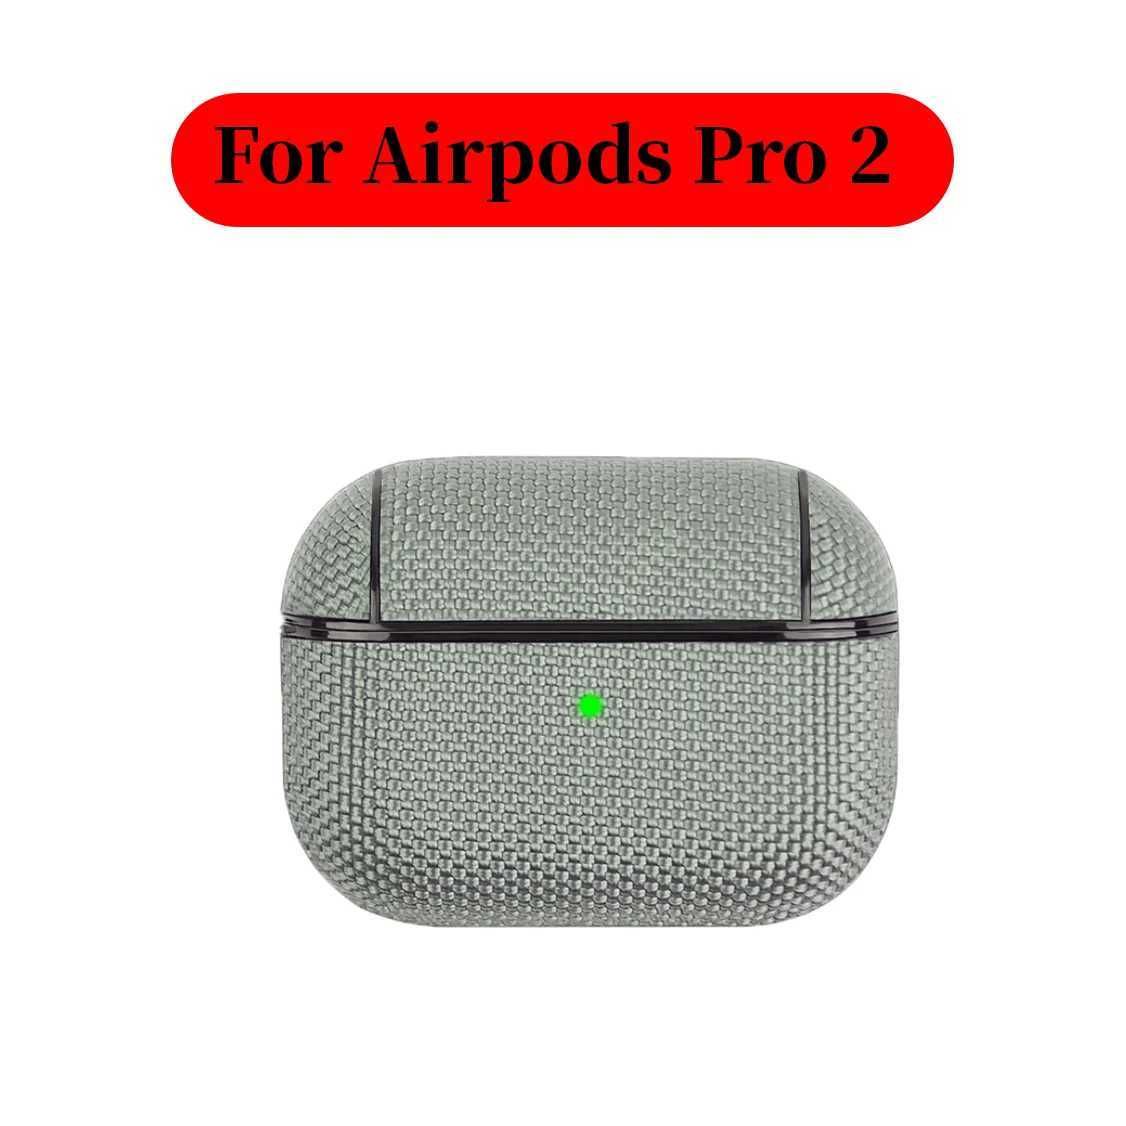 05-For AirPods Pro 2